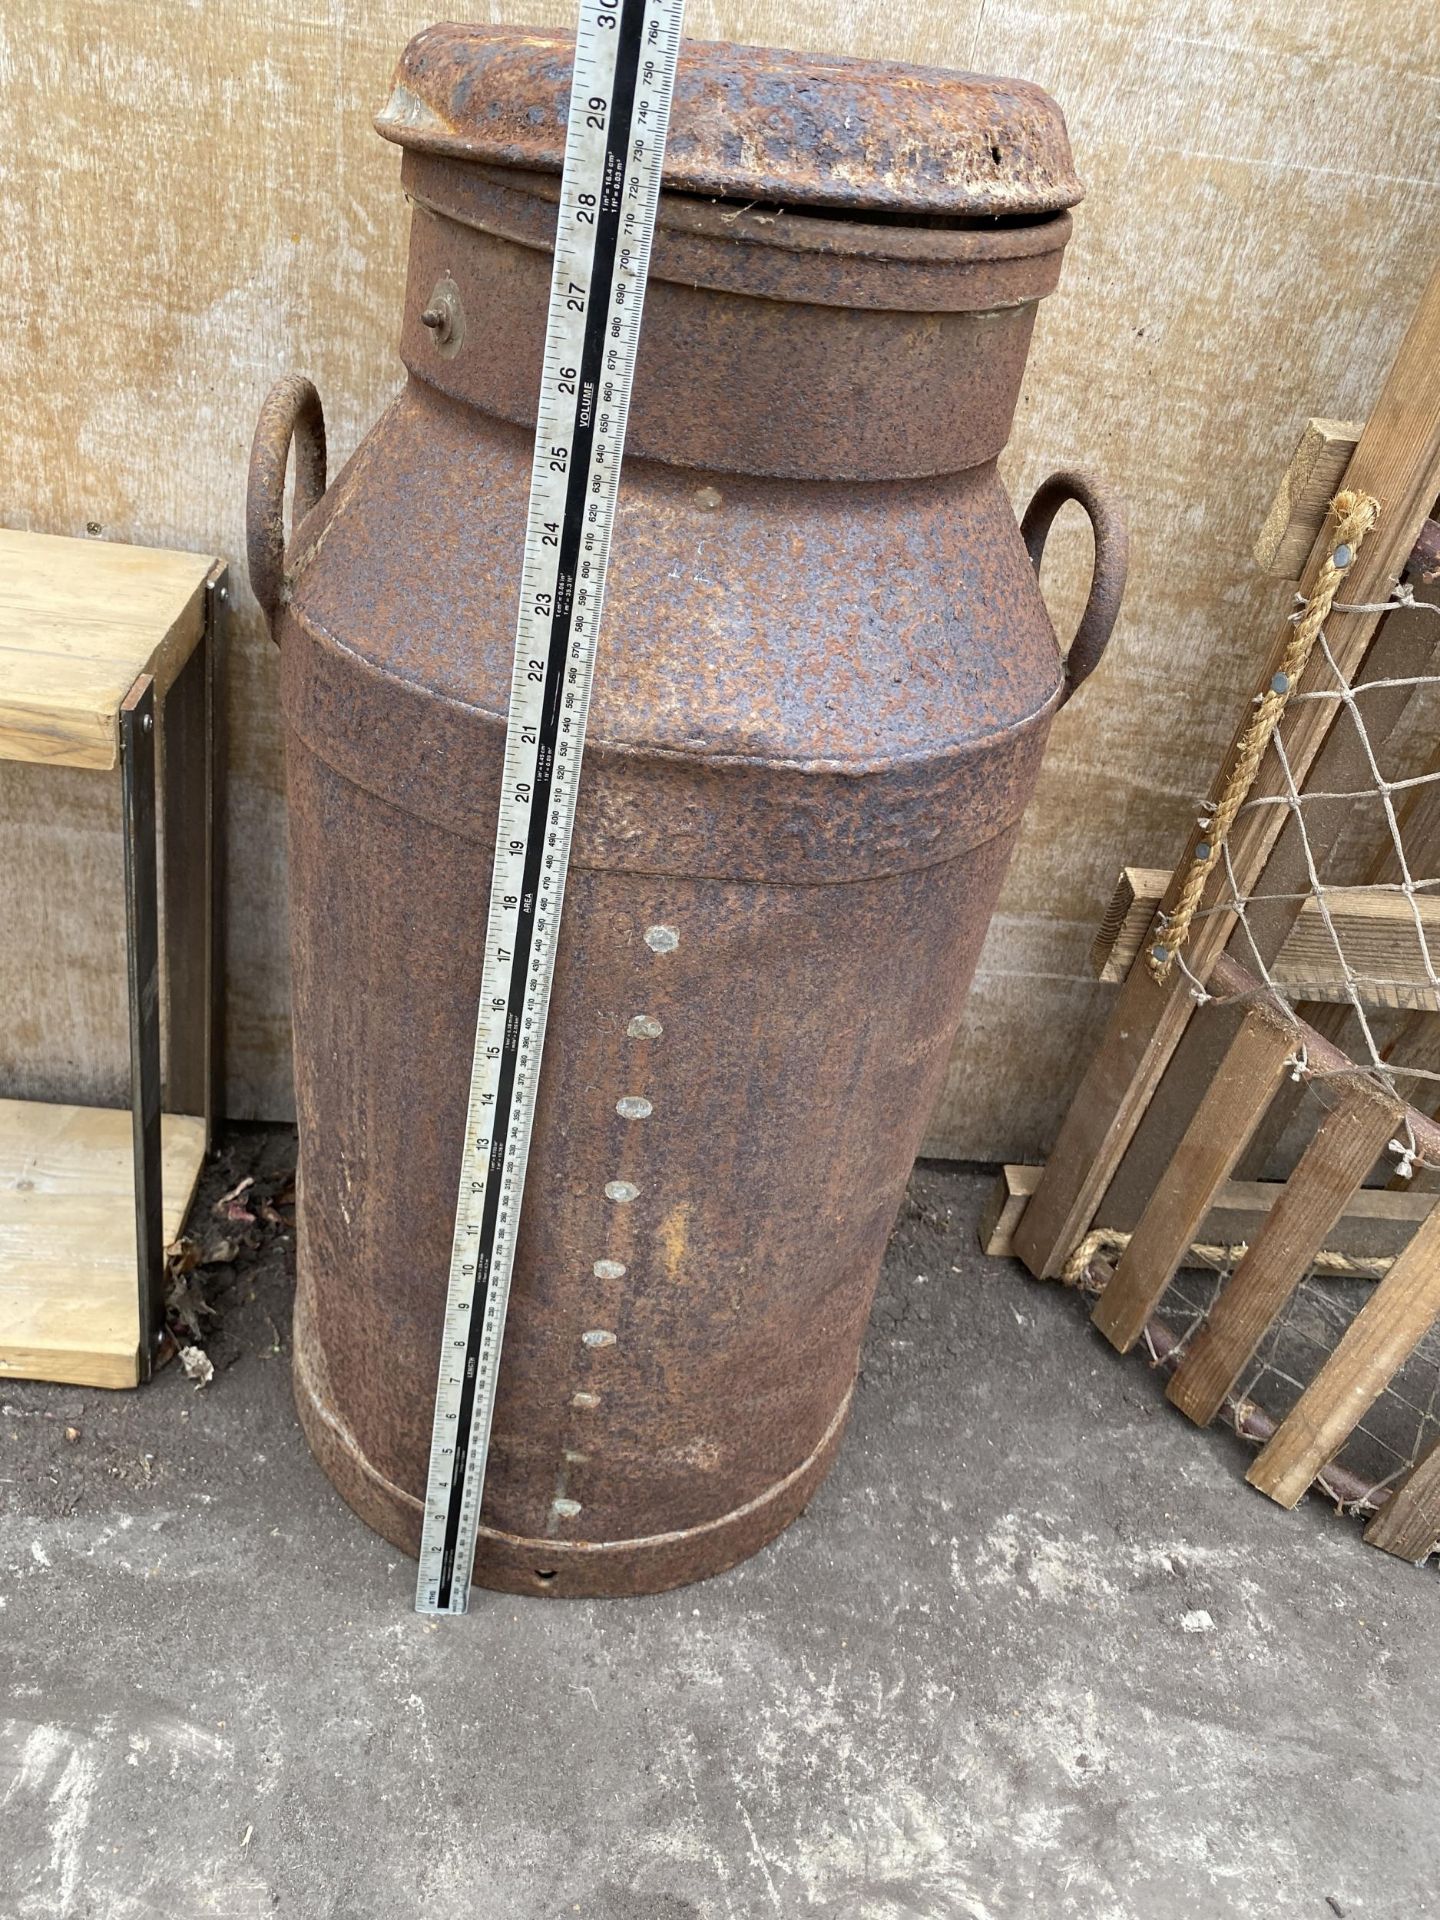 A VINTAGE MILK CHURN WITH LID BEARING AN INDISTINCT NAME - Image 2 of 2